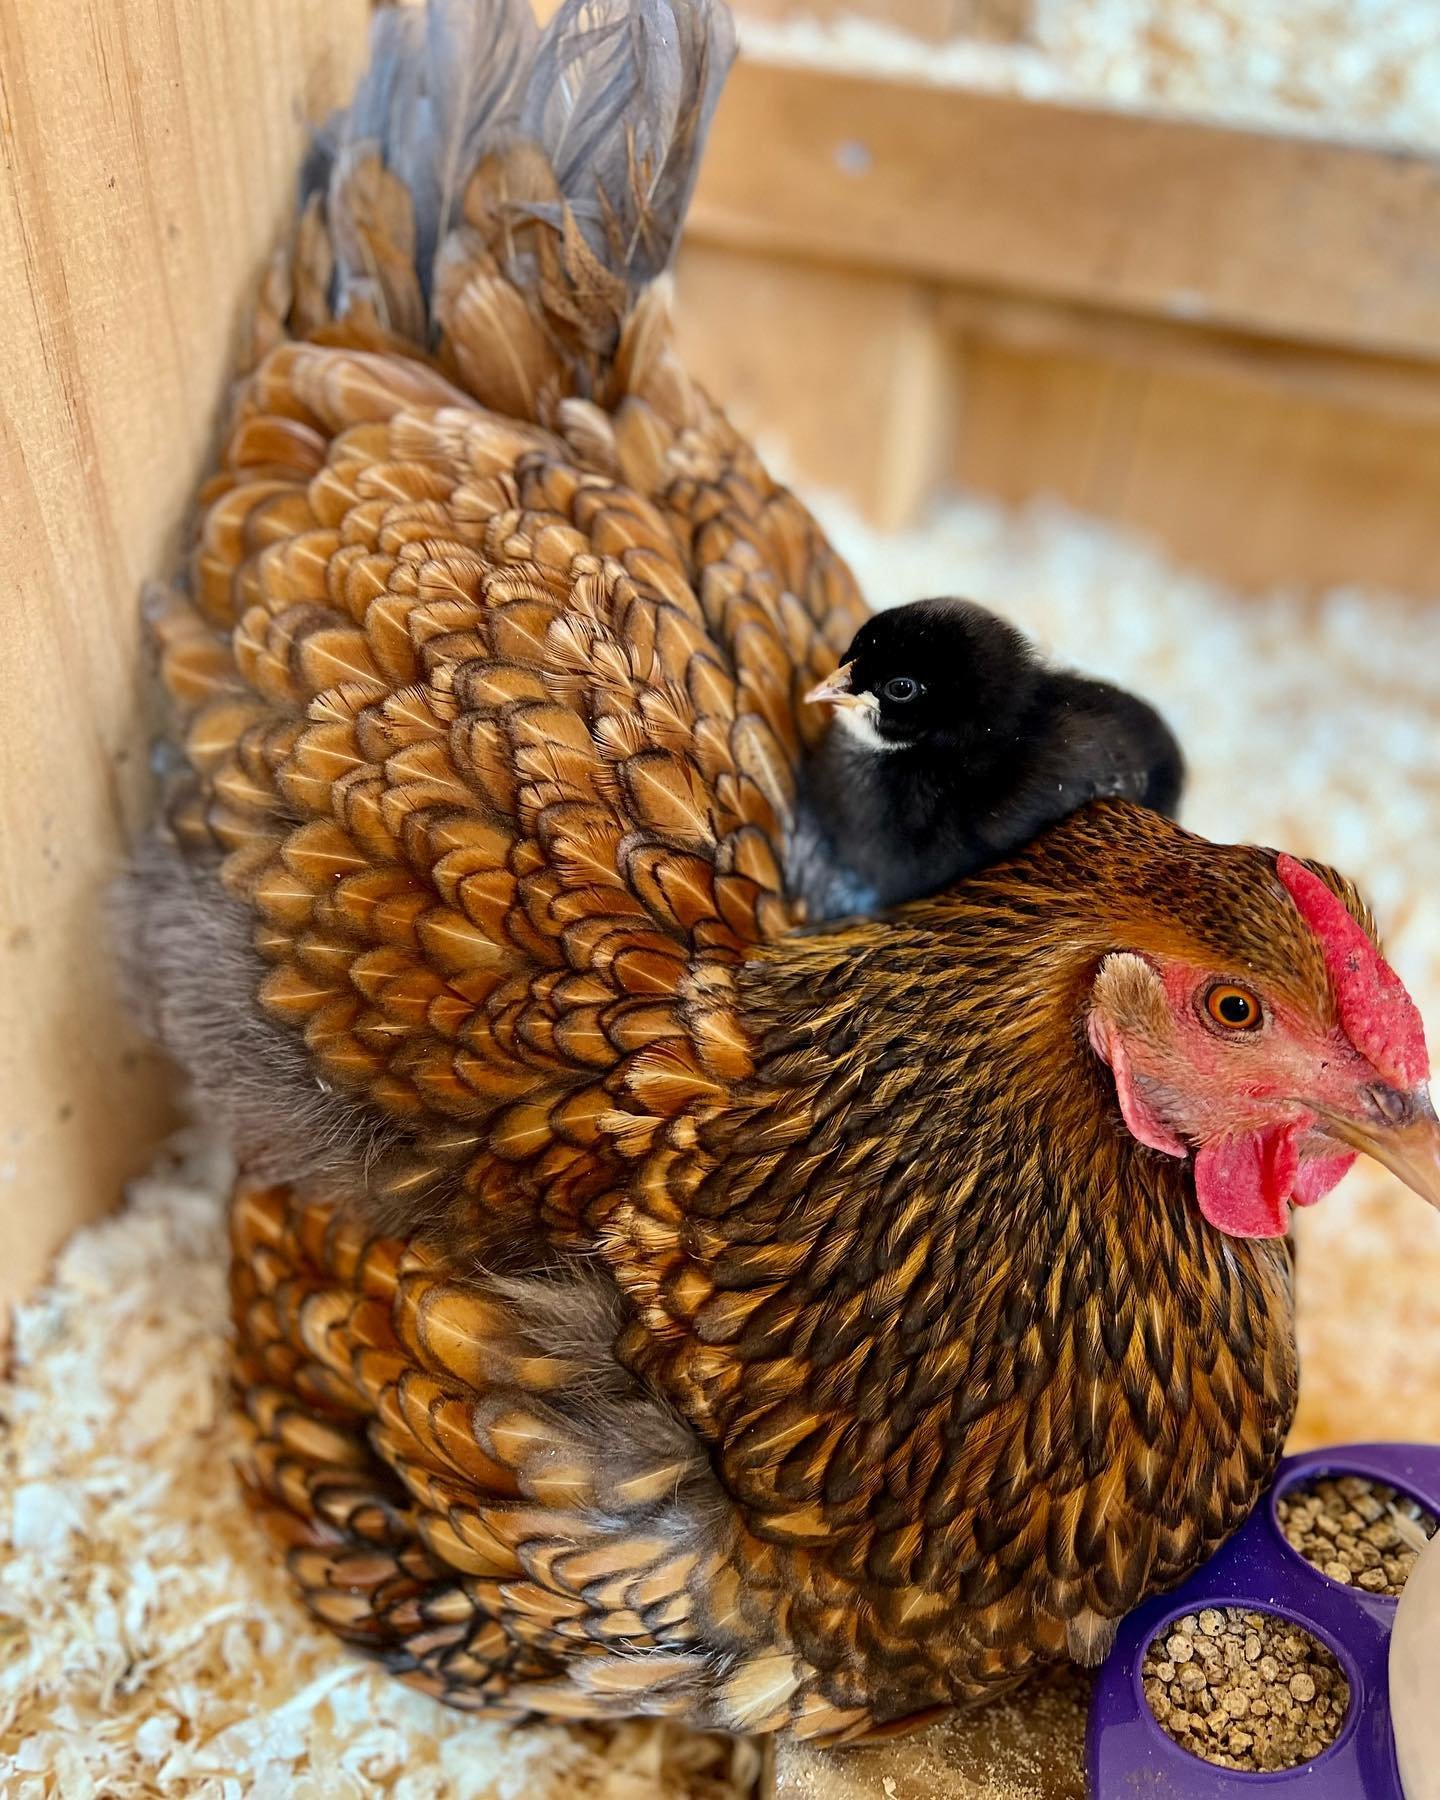 Spring Farm Update! 

1. Goldie is crushing it as Mama Hen! Giving her chicks to adopt was a total experiment and we were prepared to put them in a brooder if it didn&rsquo;t work out. It&rsquo;s been going so well and we 10/10 recommend giving your 